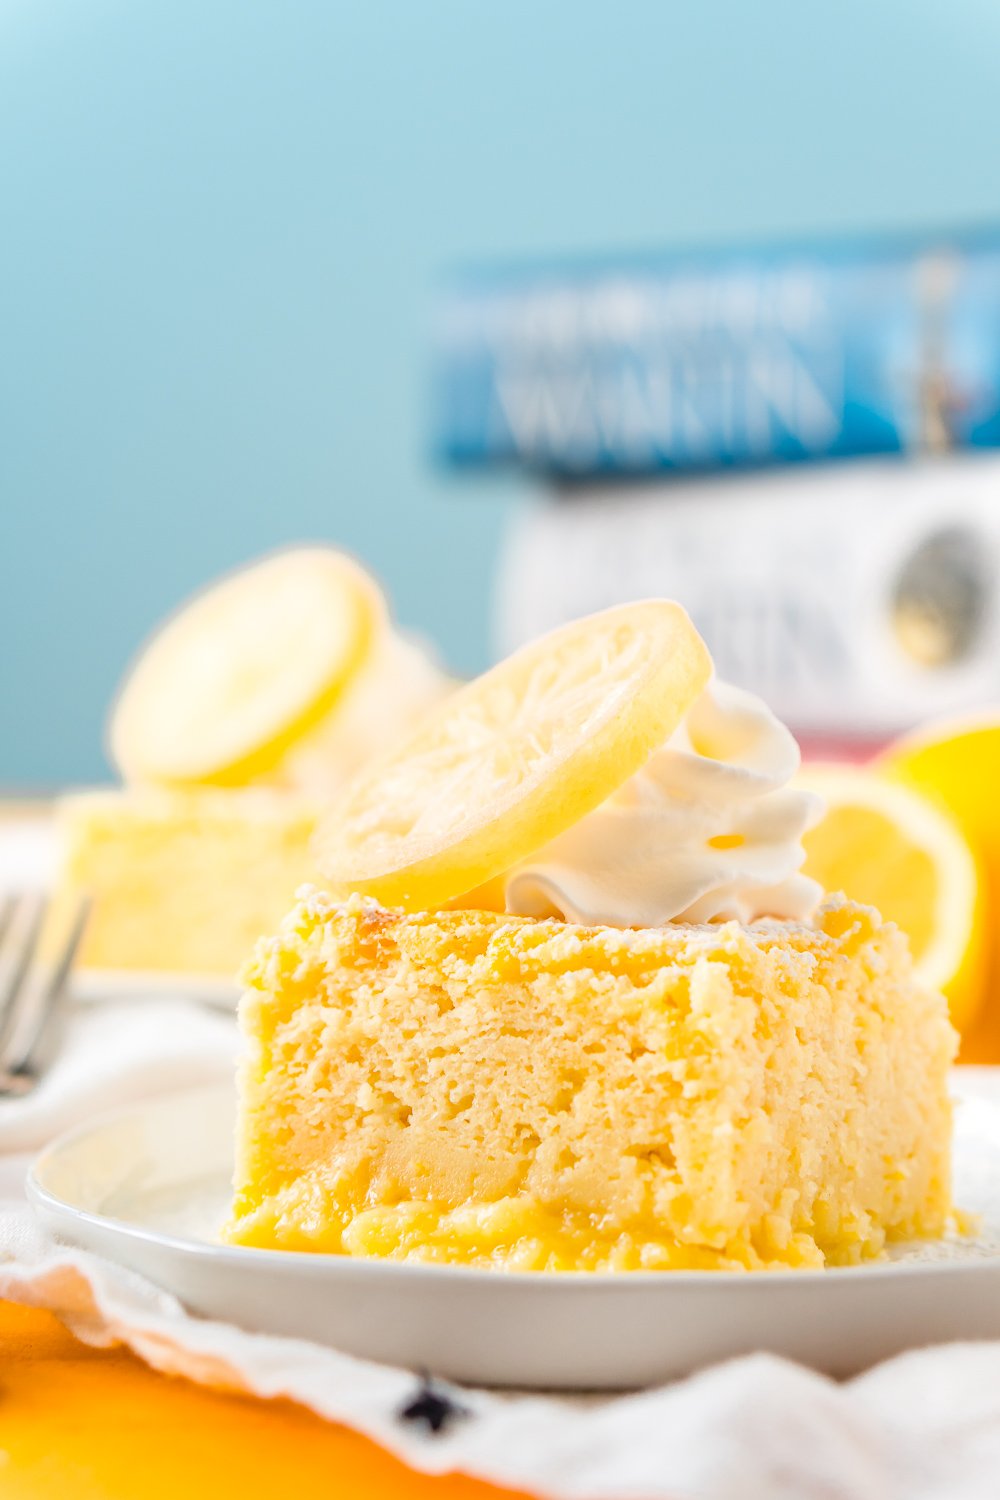 Piece of Lemon Magic Cake on a white plat with another slice of cake in the background and a fork next to it on the table.